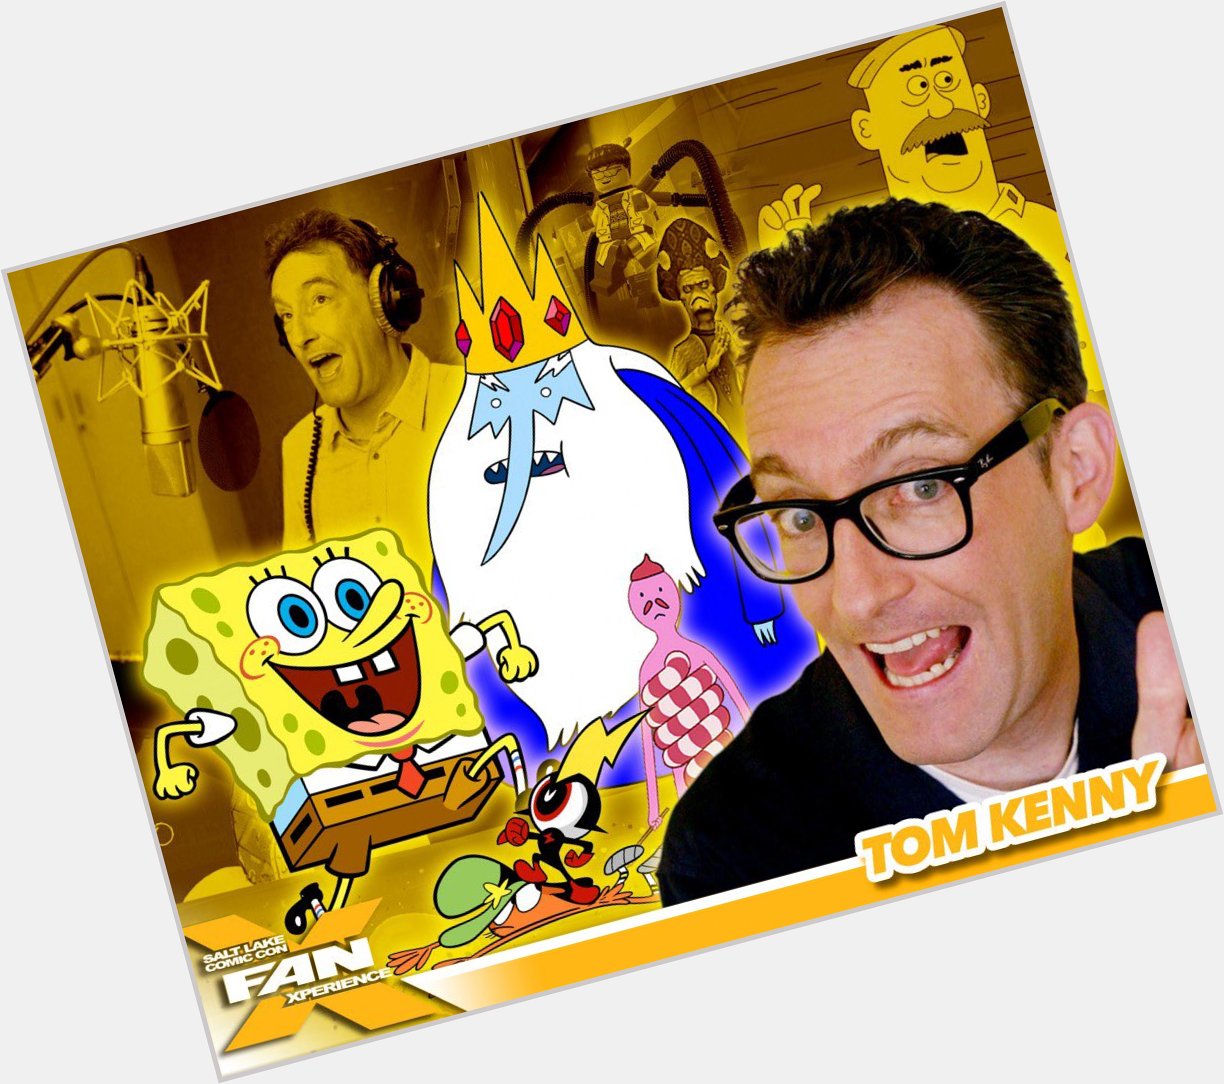 Let\s wish a LOUD and HAPPY BIRTHDAY to Tom Kenny the voice of our favorite Sponge! 